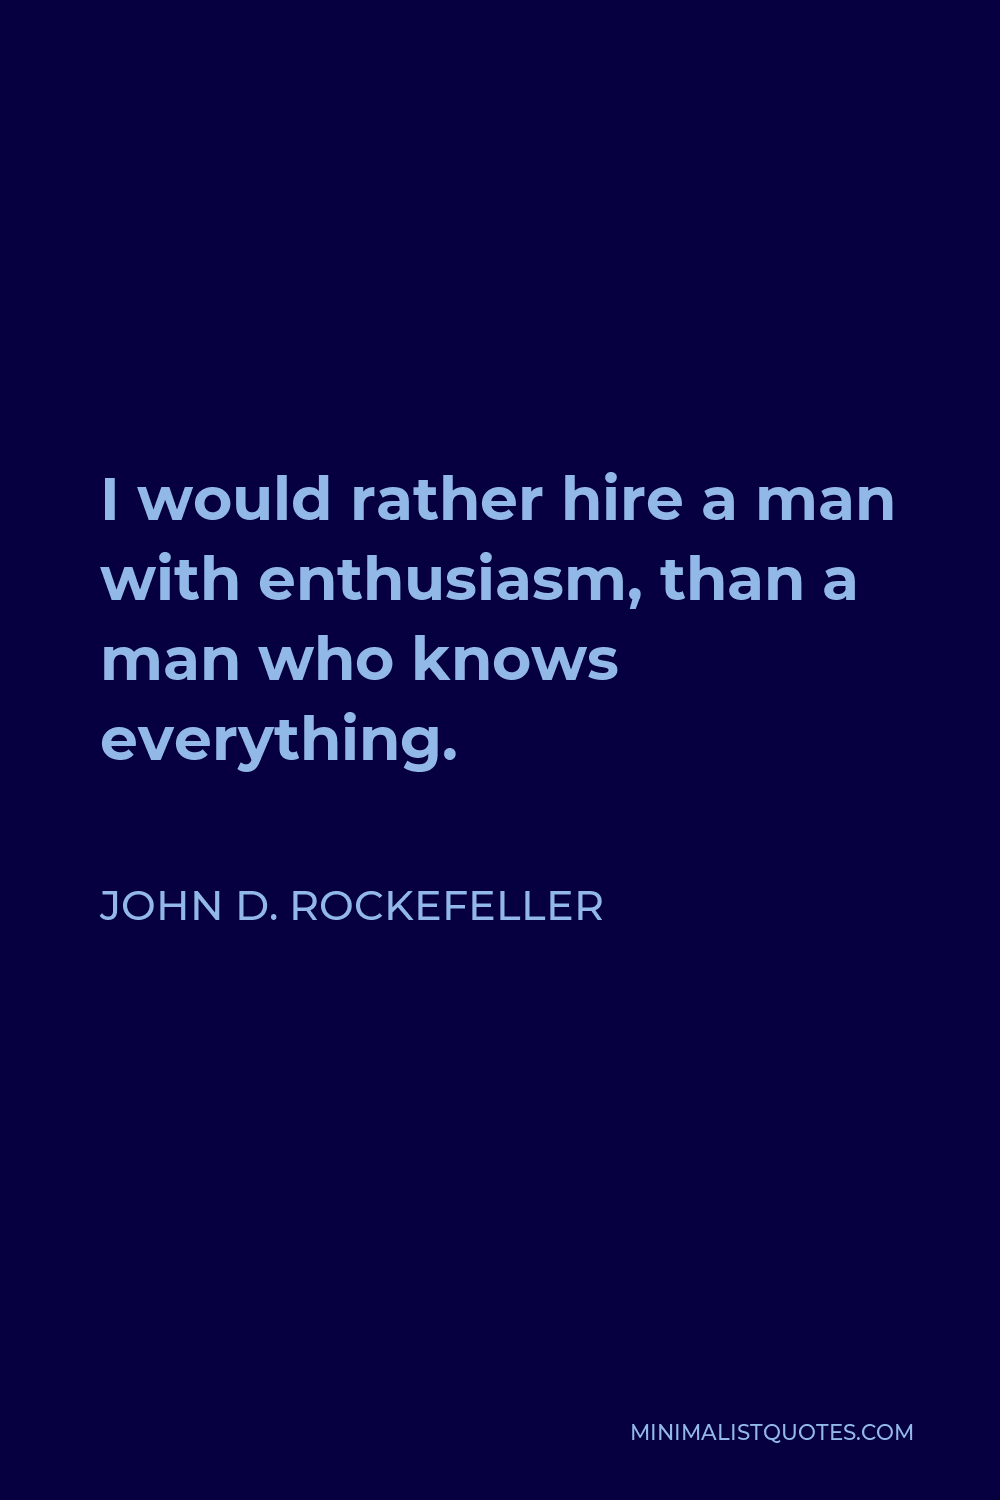 John D. Rockefeller Quote - I would rather hire a man with enthusiasm, than a man who knows everything.